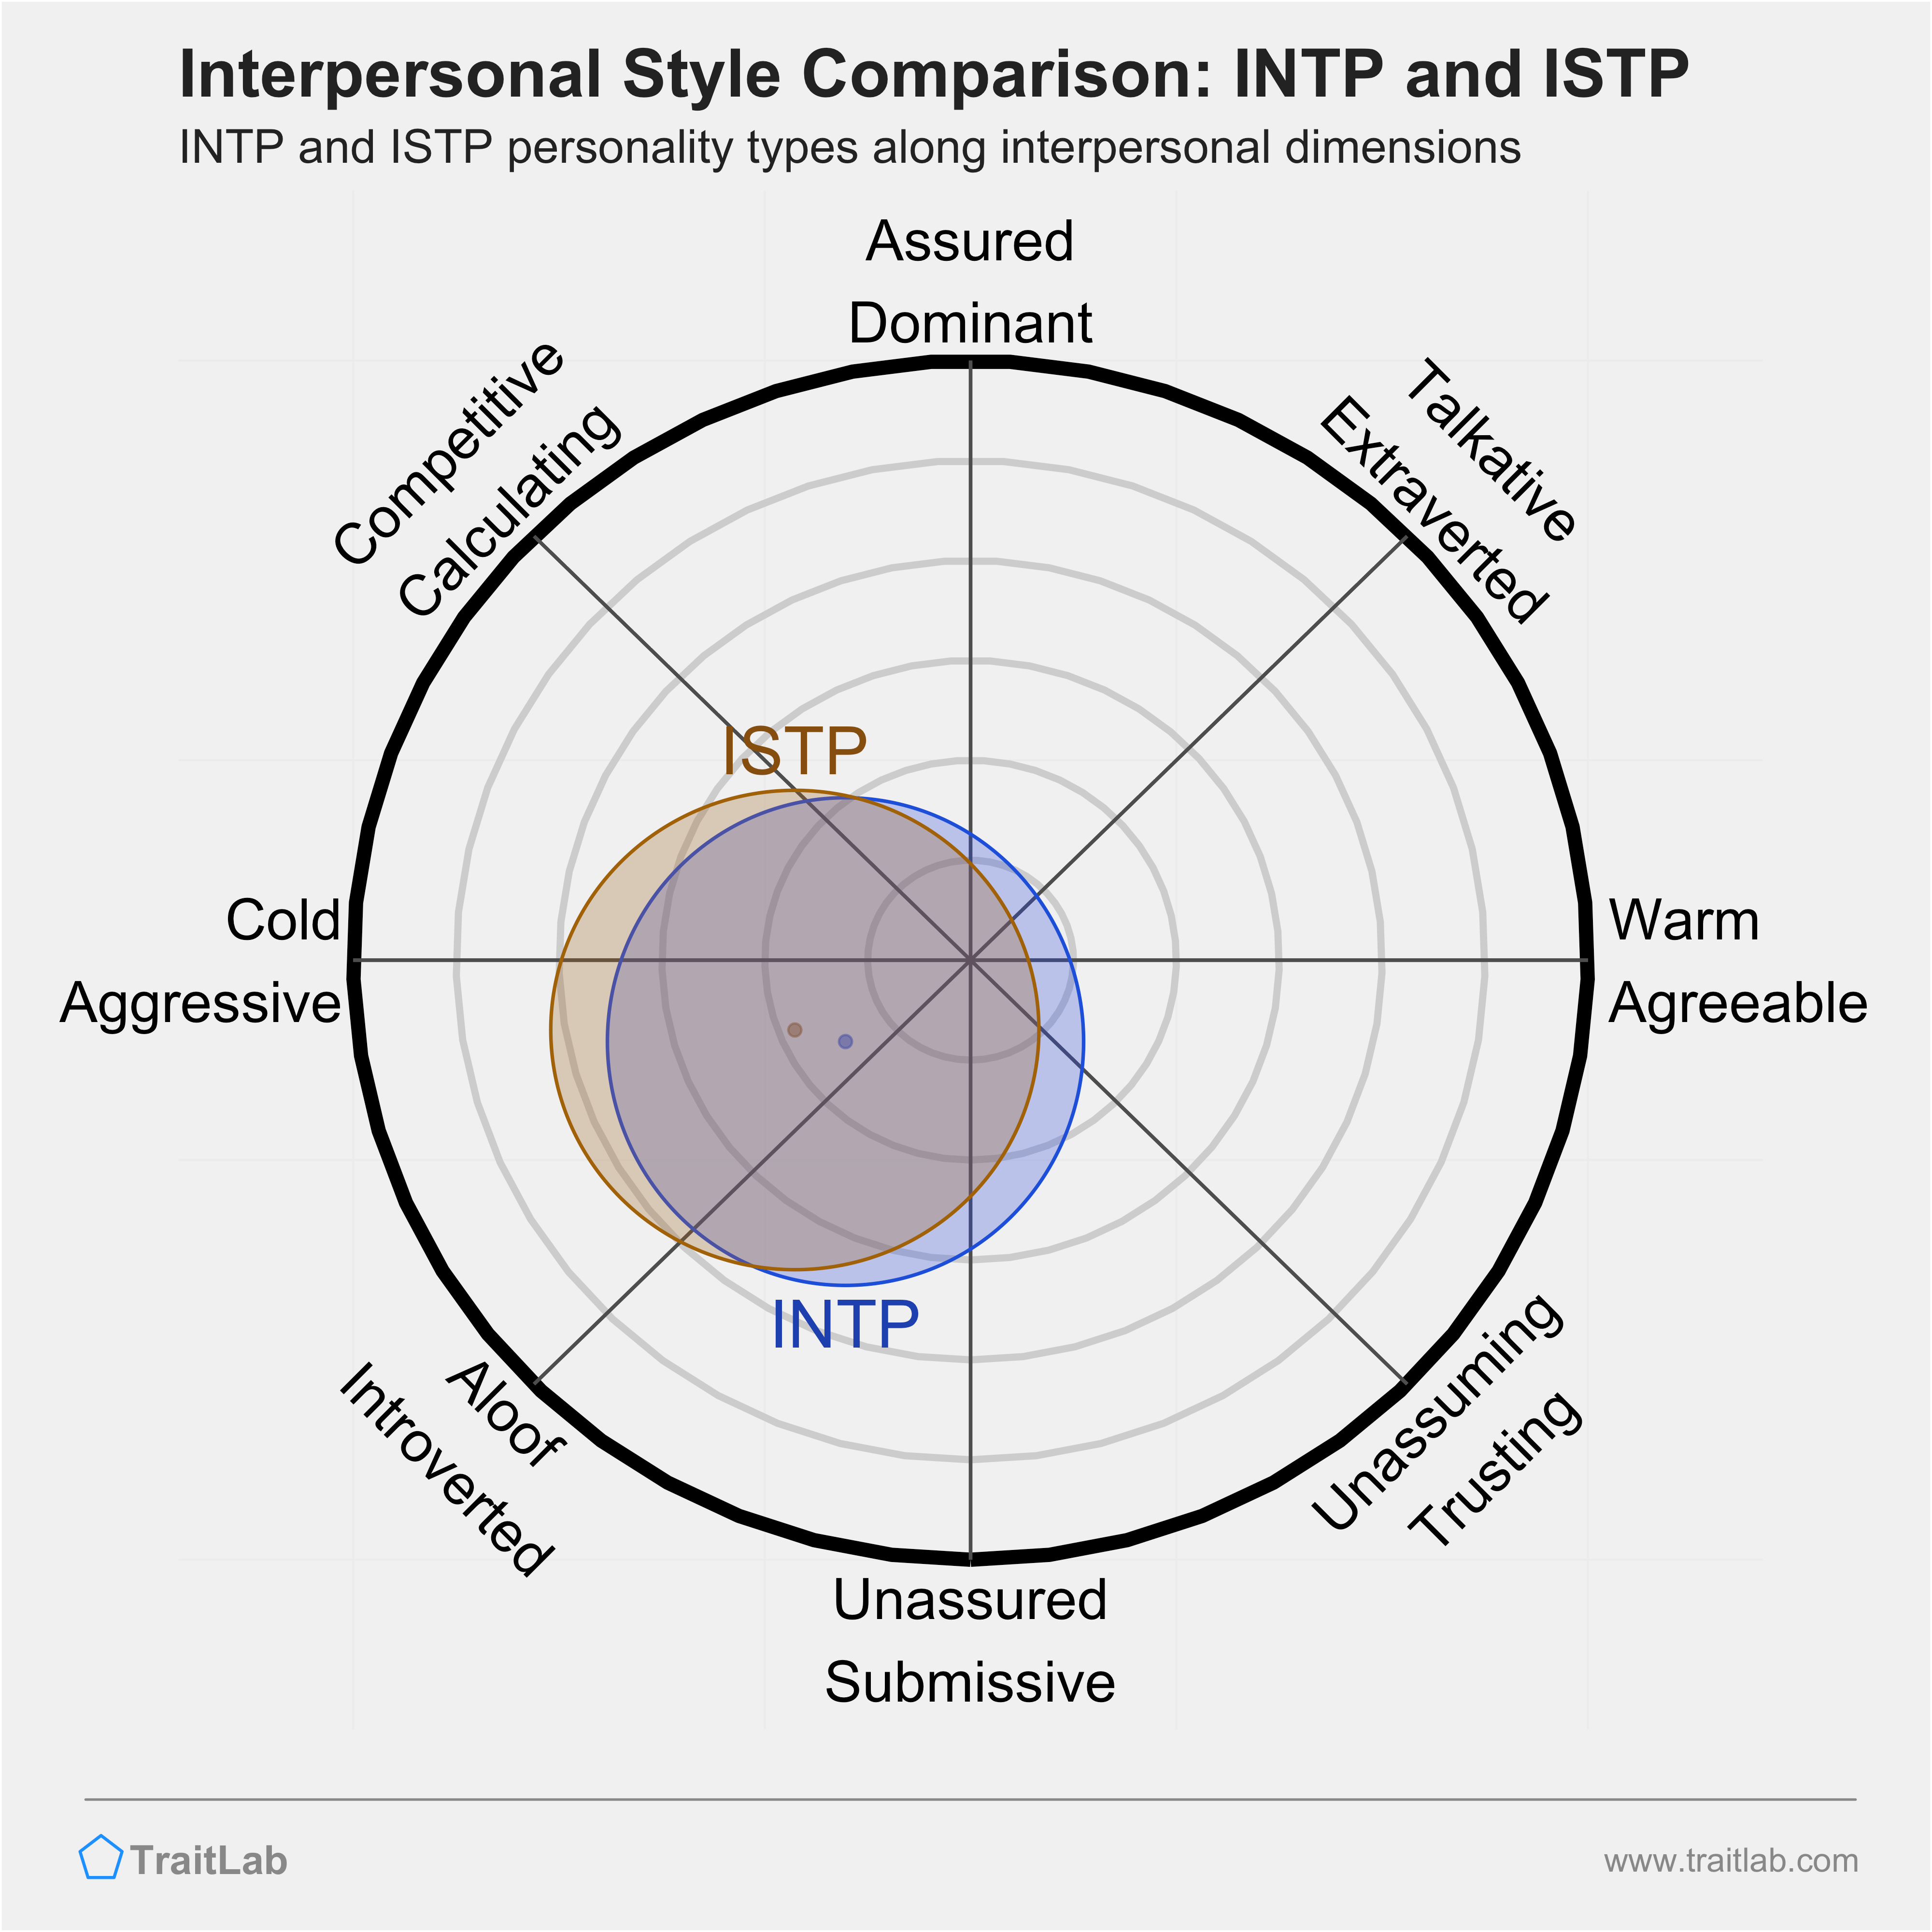 INTP and ISTP comparison across interpersonal dimensions